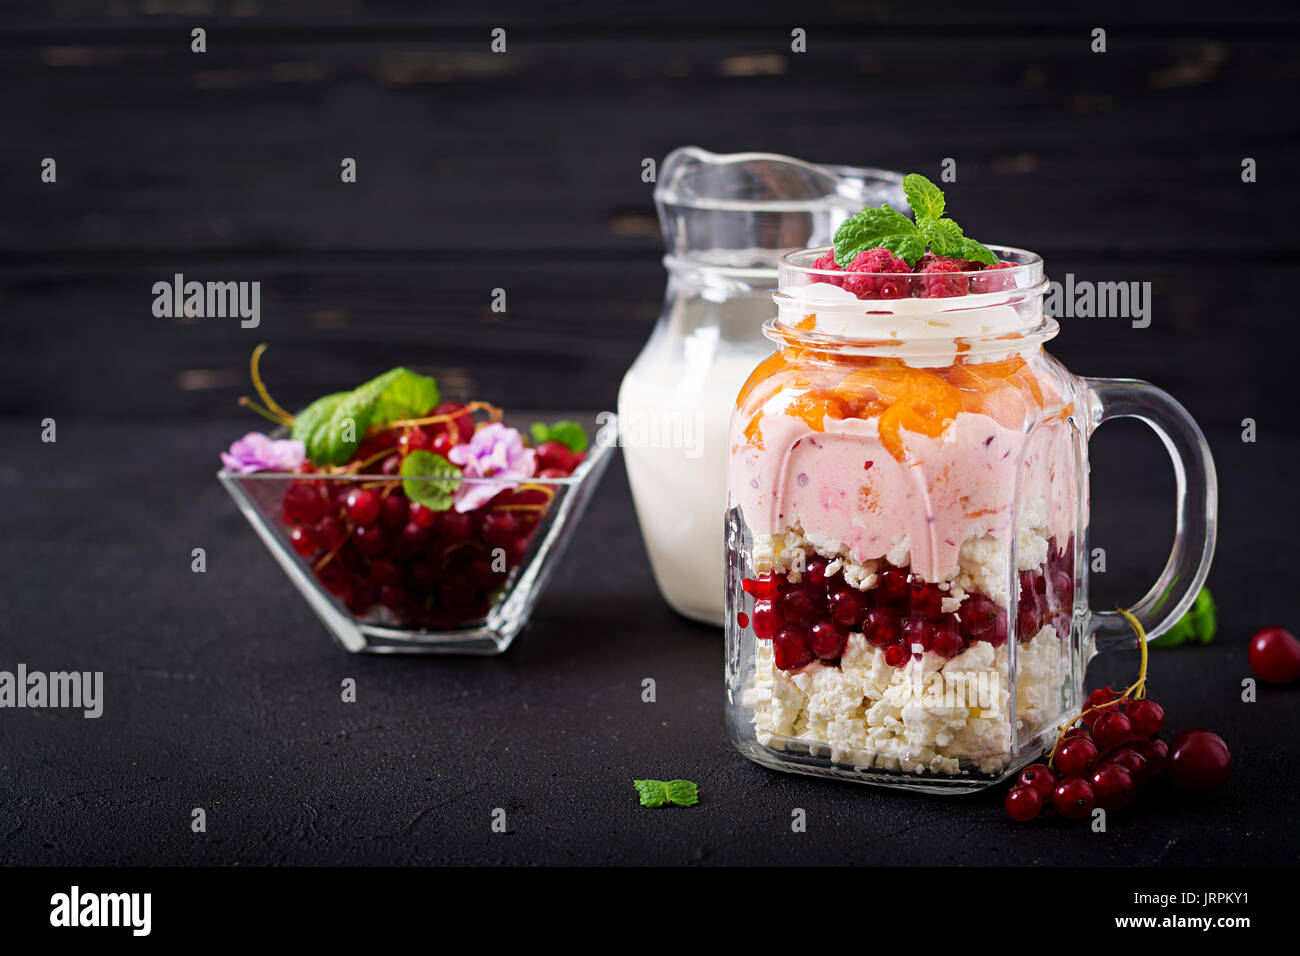 Cottage Cheese And Yoghurt Desserts With Summer Berries In A Jar